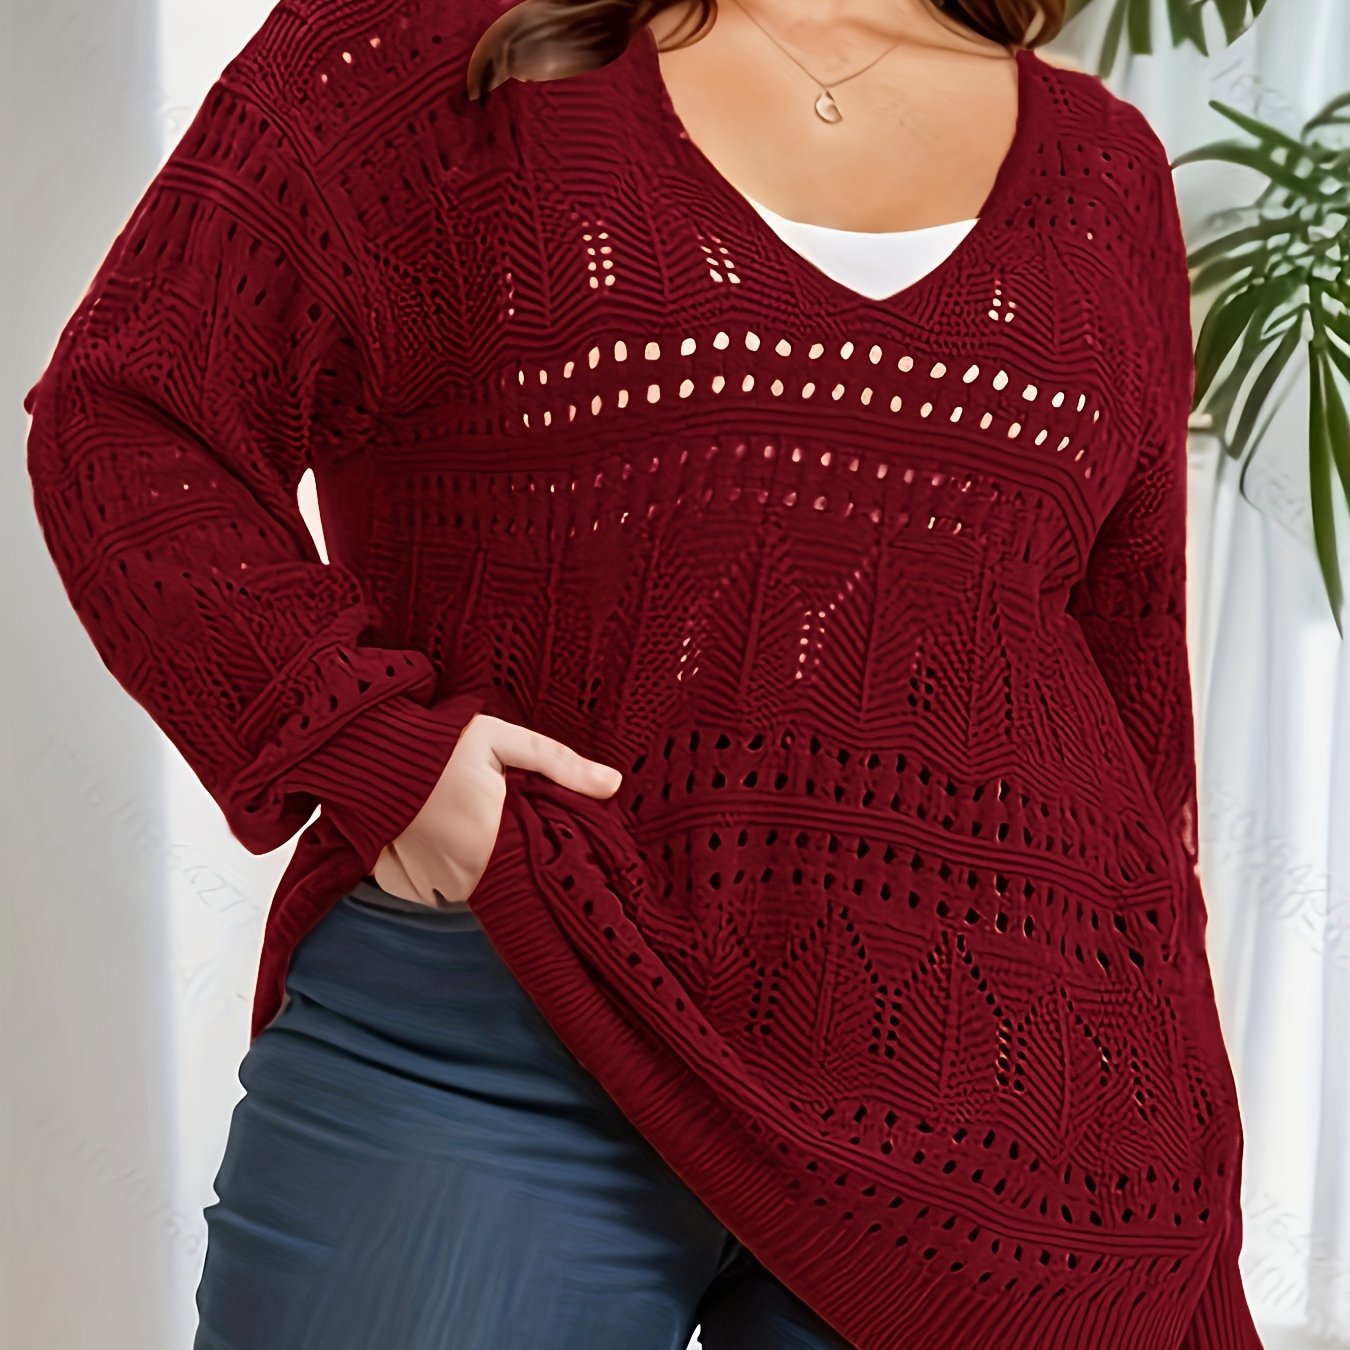 Plus Size Casual Knit Top, Women's Plus Solid Hollow Out Long Sleeve V Neck Sheer Pullover Sweater Brick Red